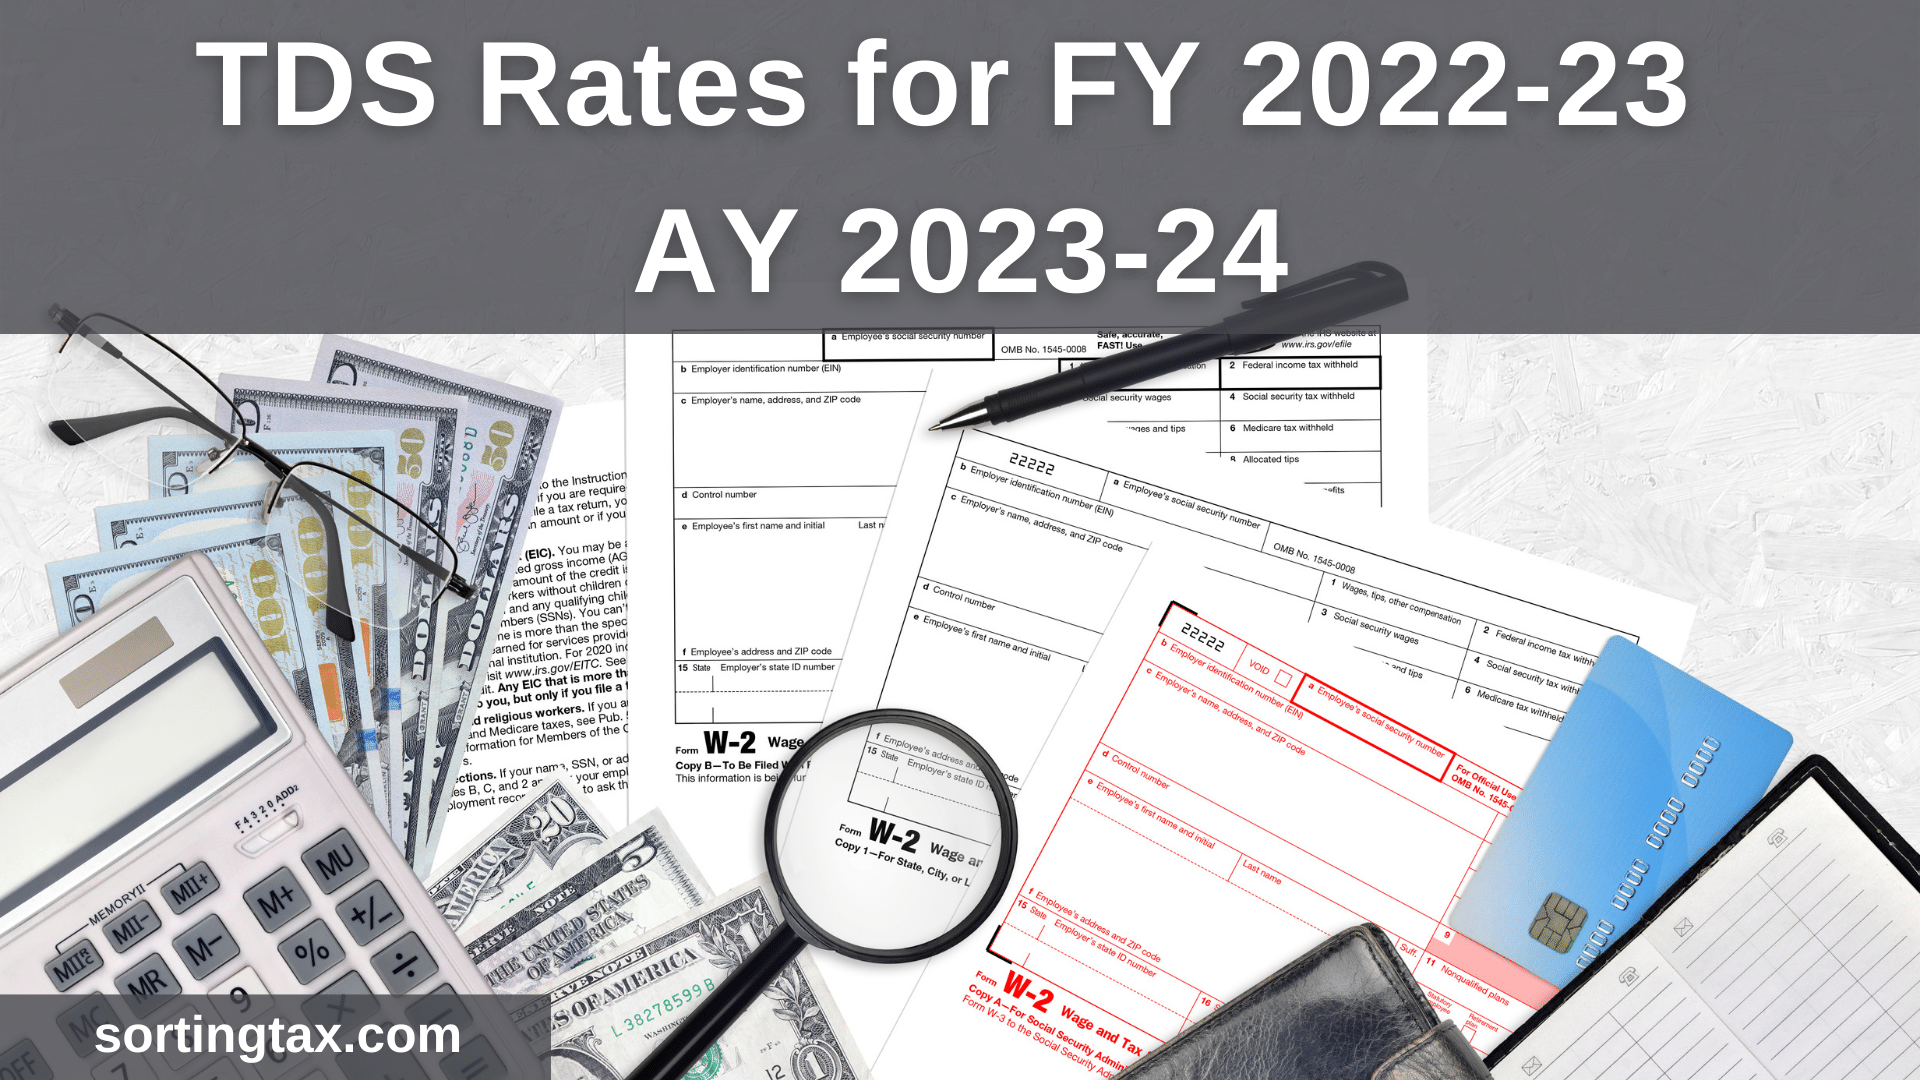 TDS Rates for FY 2022-23 AY 2023 24